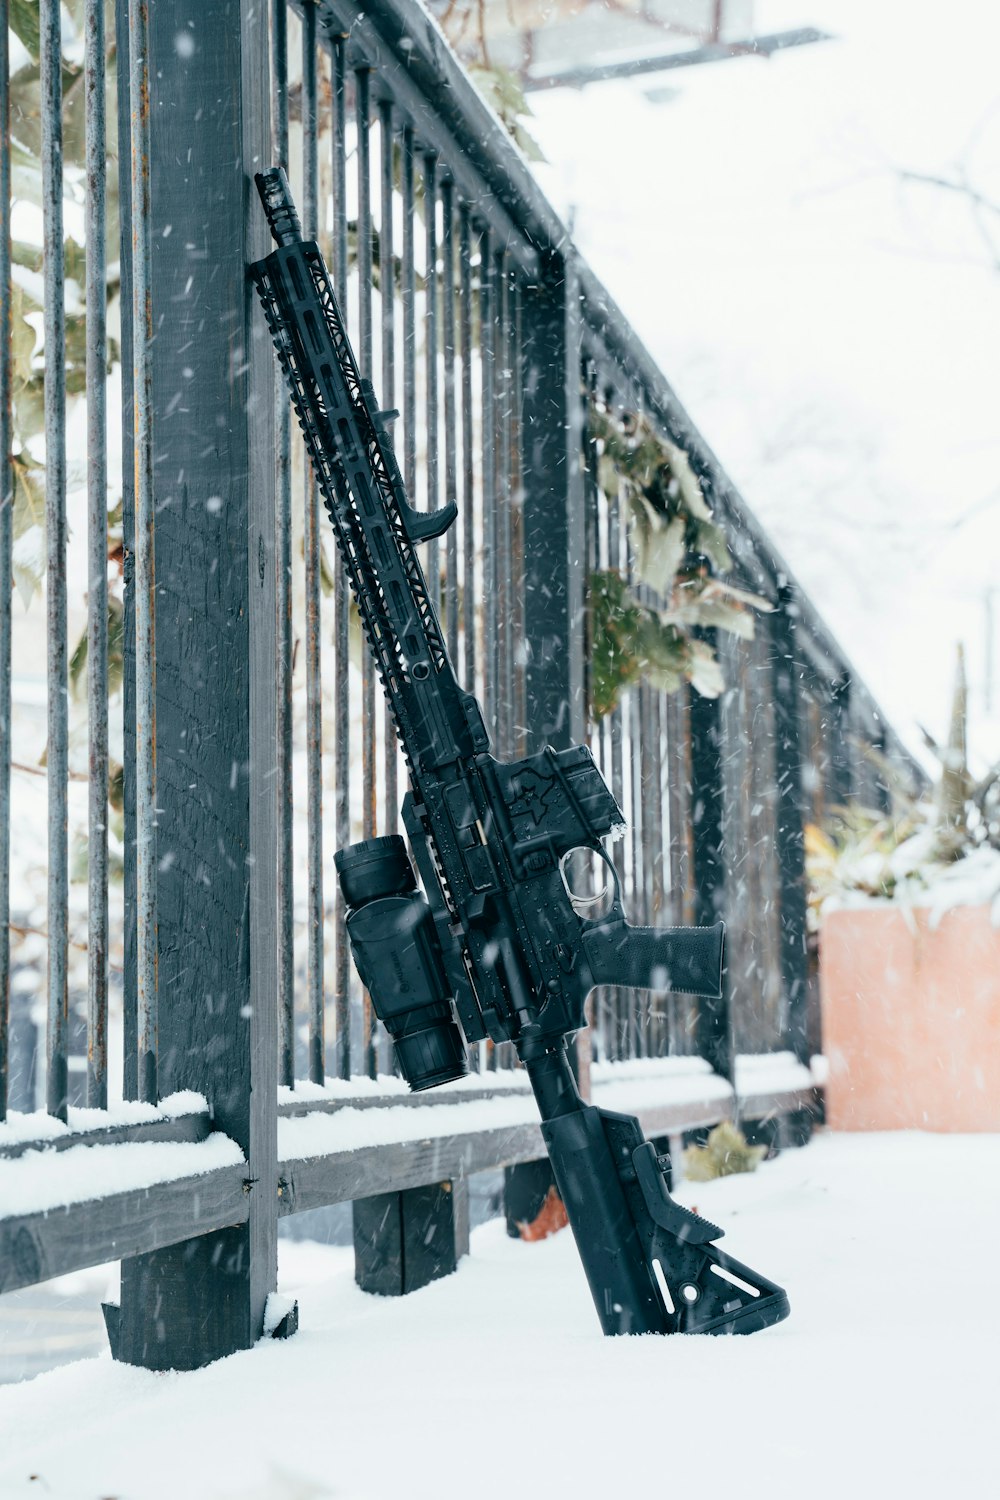 black rifle on snow covered ground